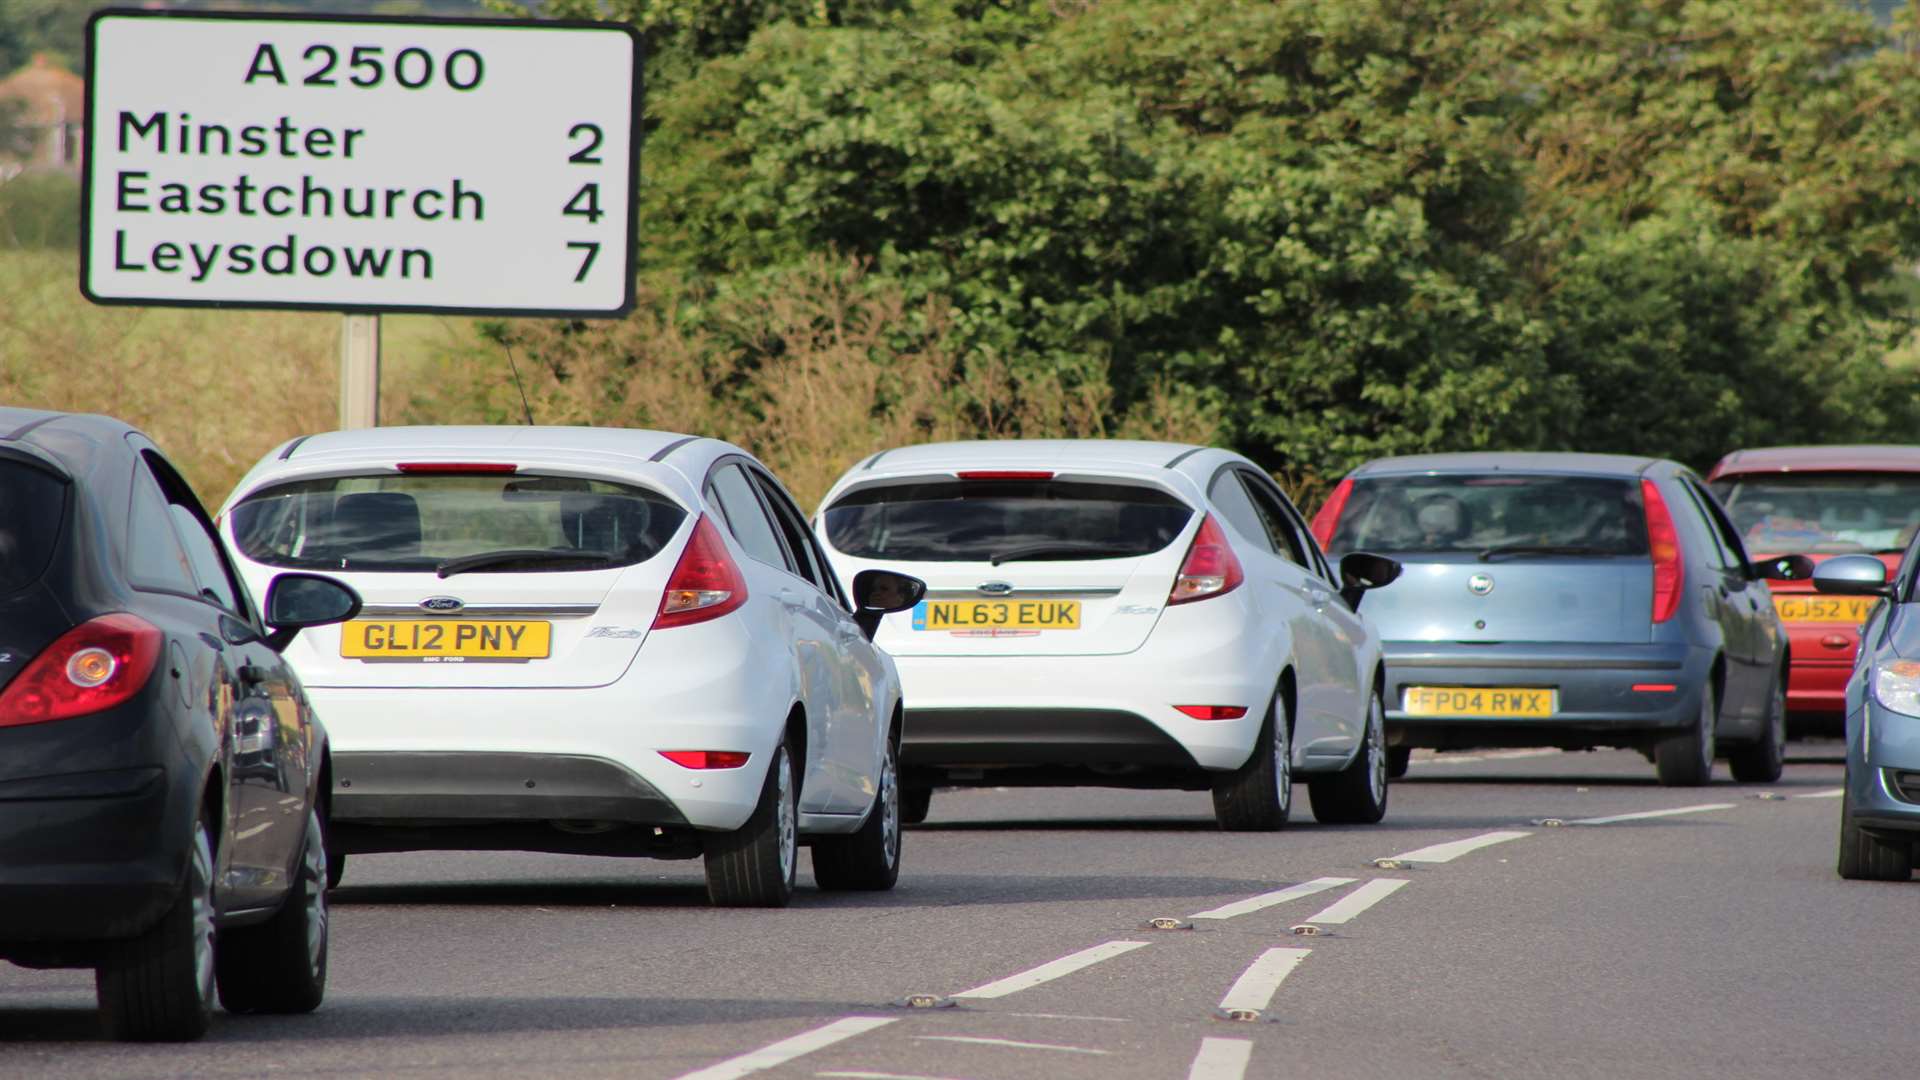 90% of Islanders who filled in the SheppeyProud survey want action to cut traffic queues on the Lower Road.